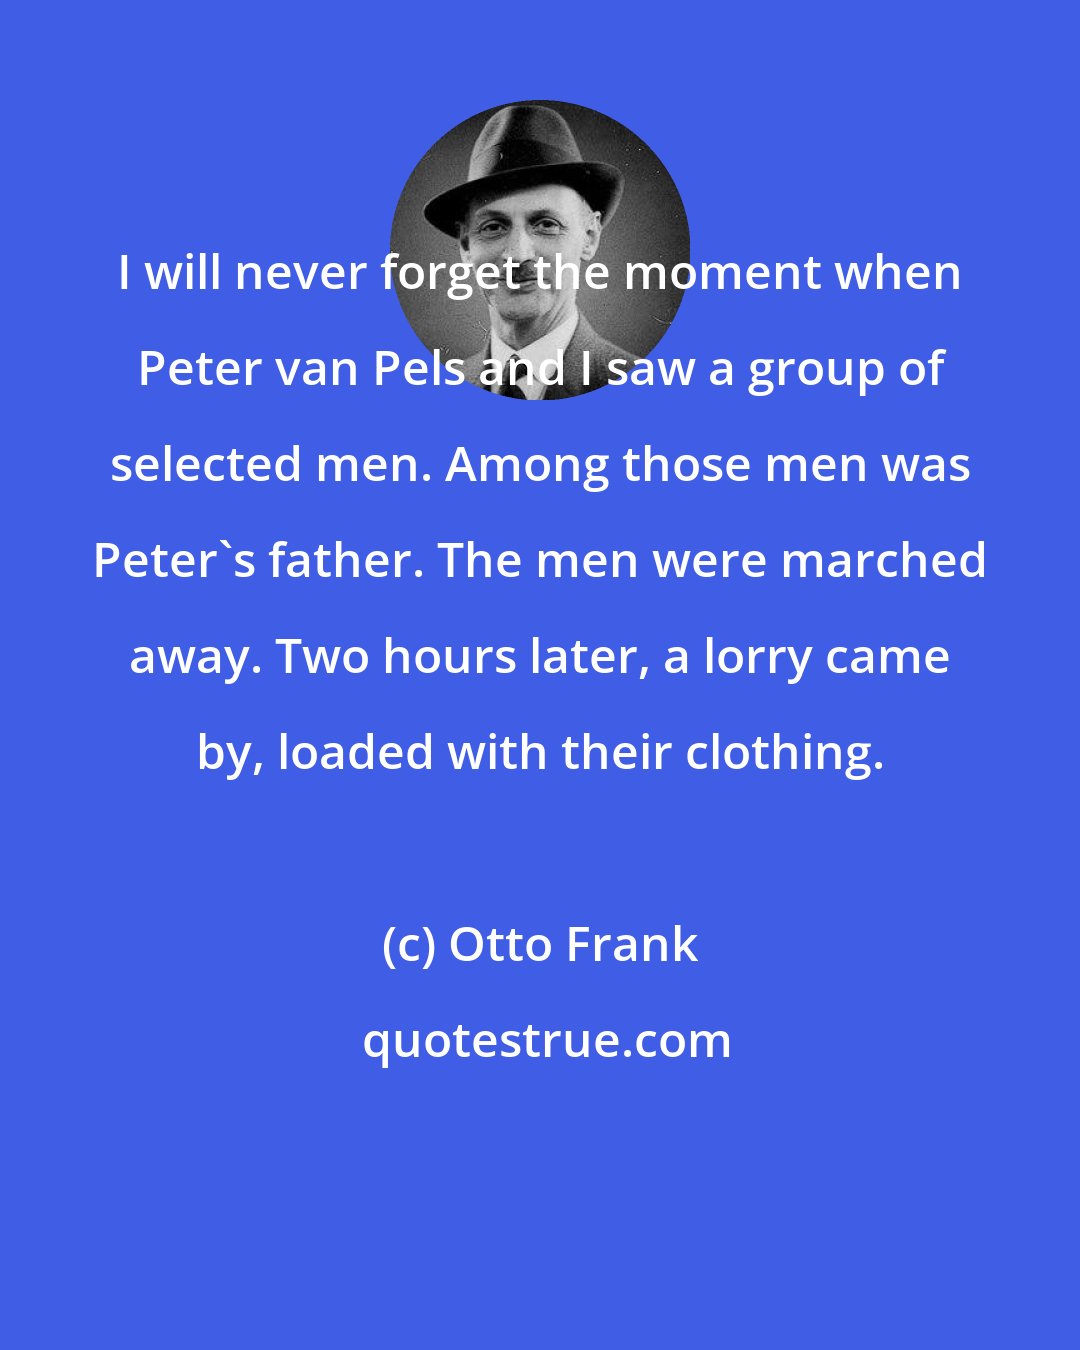 Otto Frank: I will never forget the moment when Peter van Pels and I saw a group of selected men. Among those men was Peter's father. The men were marched away. Two hours later, a lorry came by, loaded with their clothing.